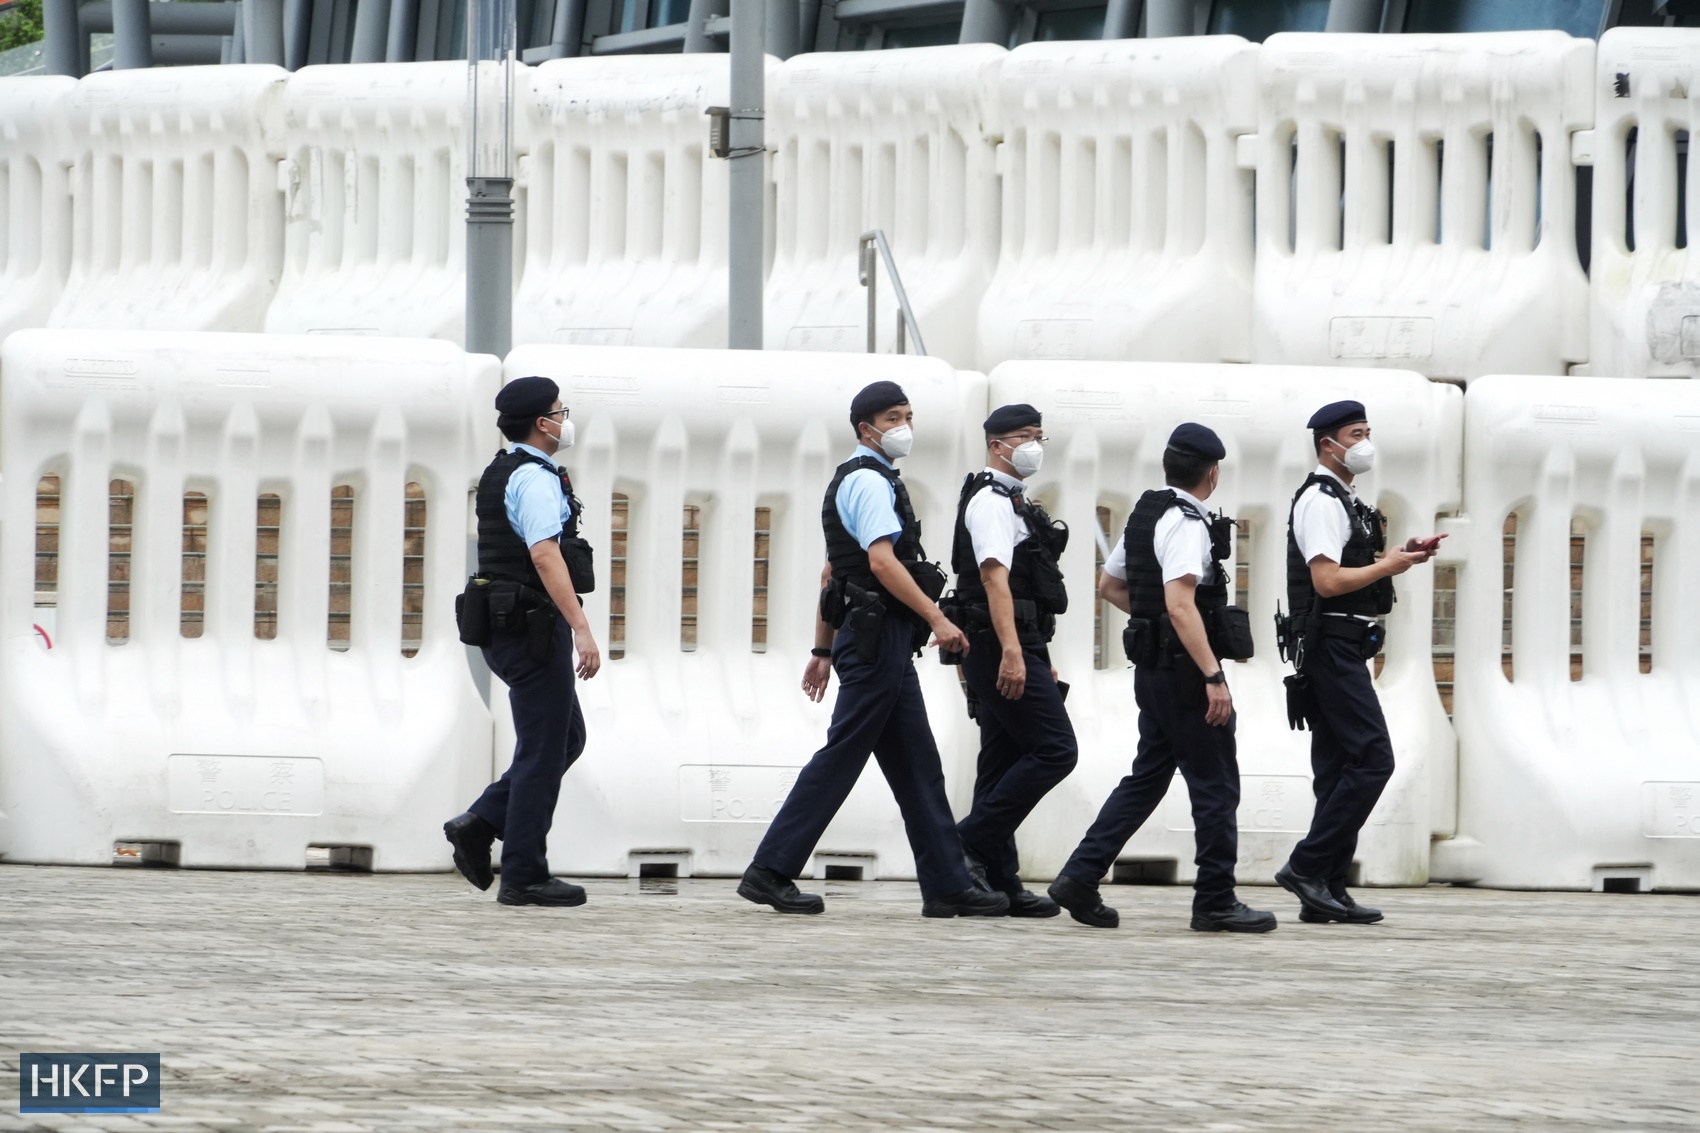 July 1, 2022 Handover anniversary West Kowloon Station police water barricade